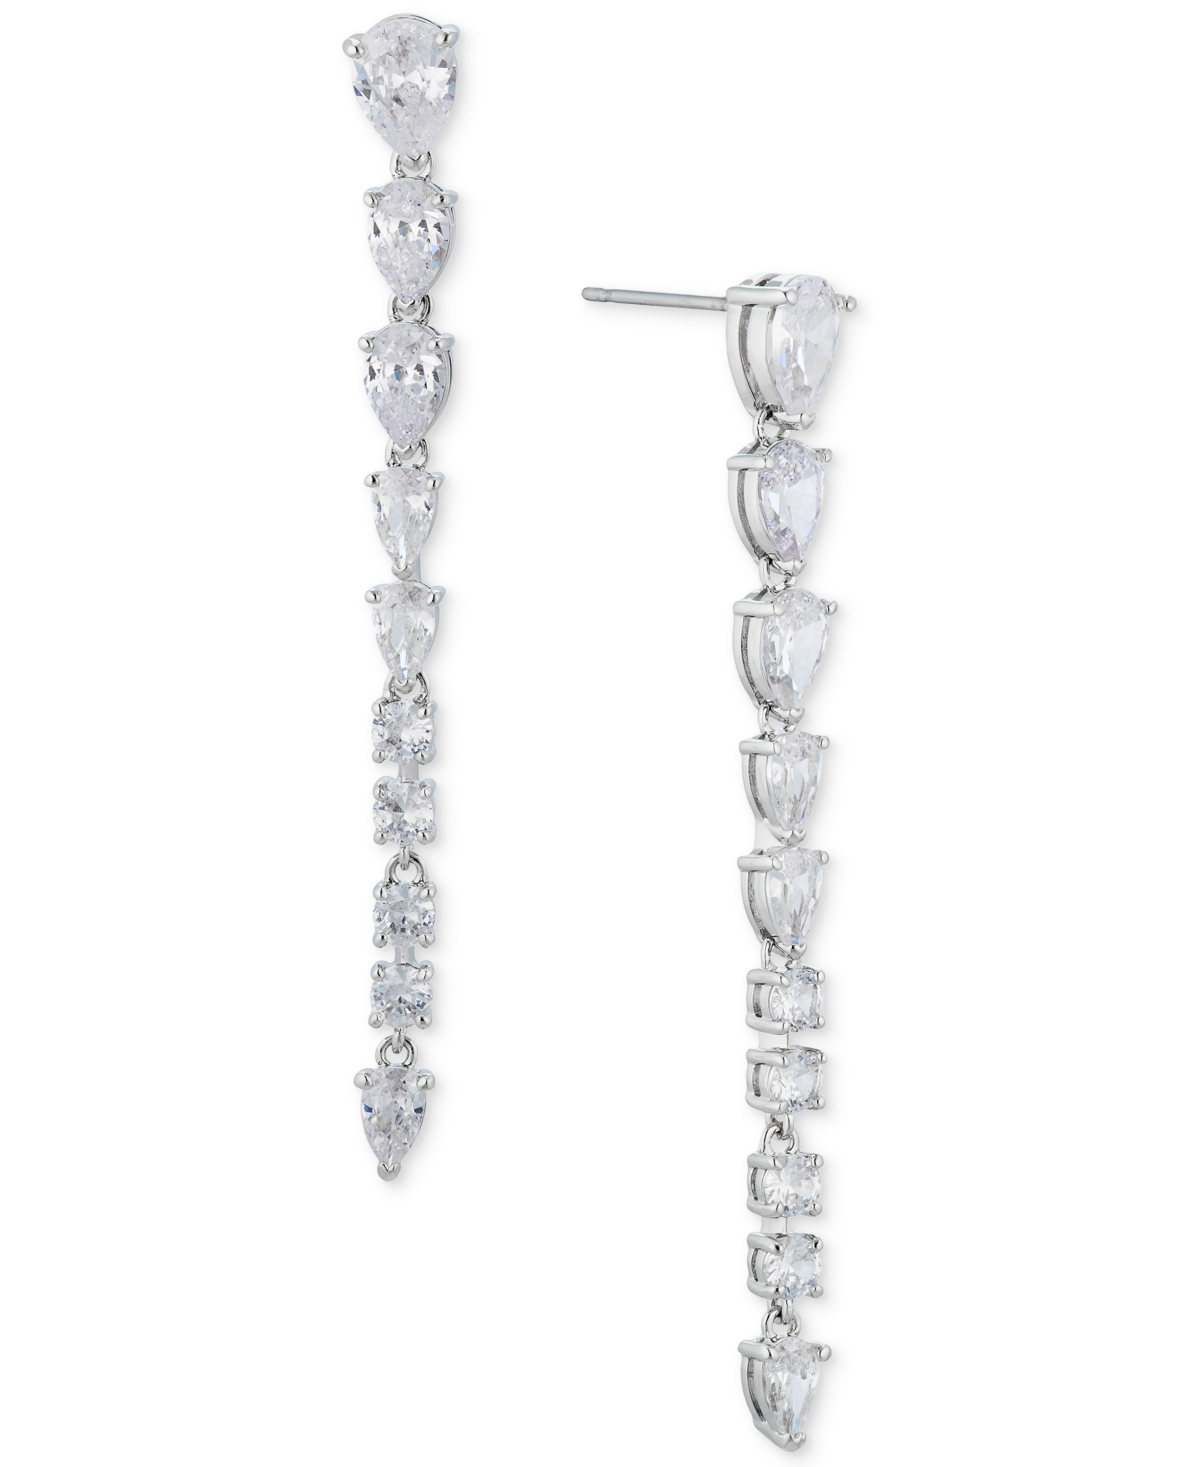 Silver-Tone Mixed Stone Long Linear Drop Earrings, Created for Macy's - Silver